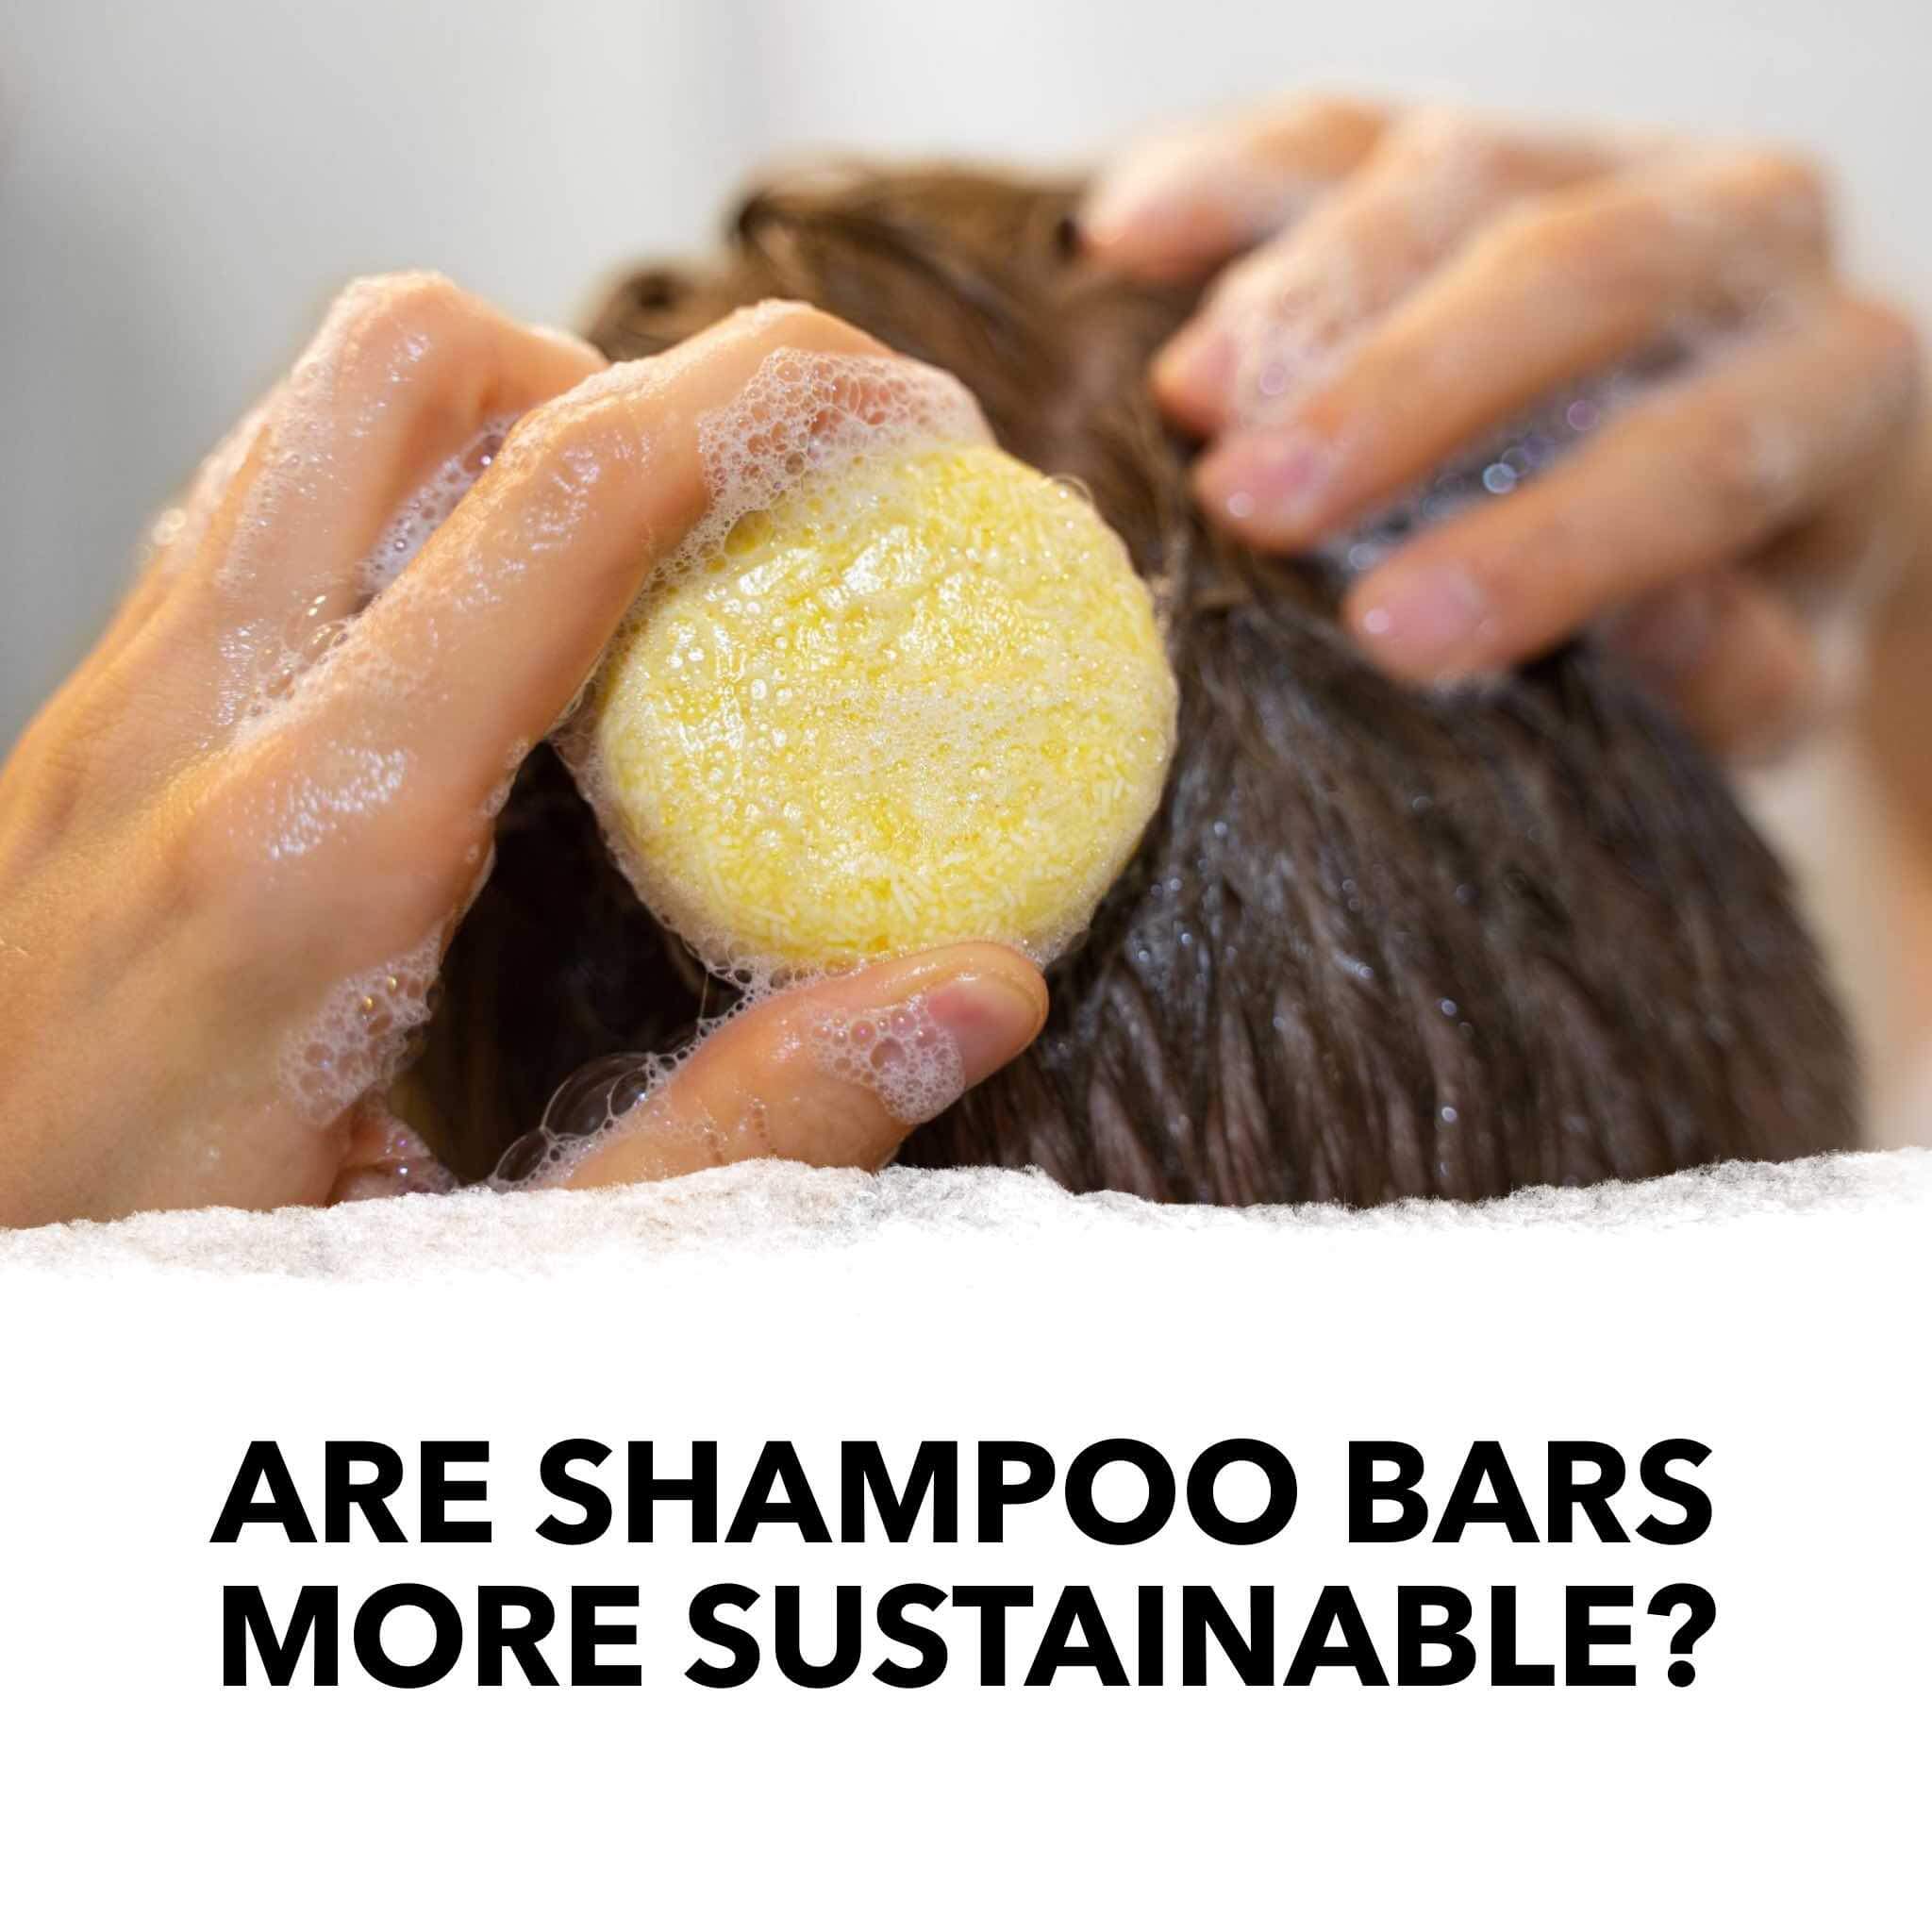 are shampoo bars more sustainable?